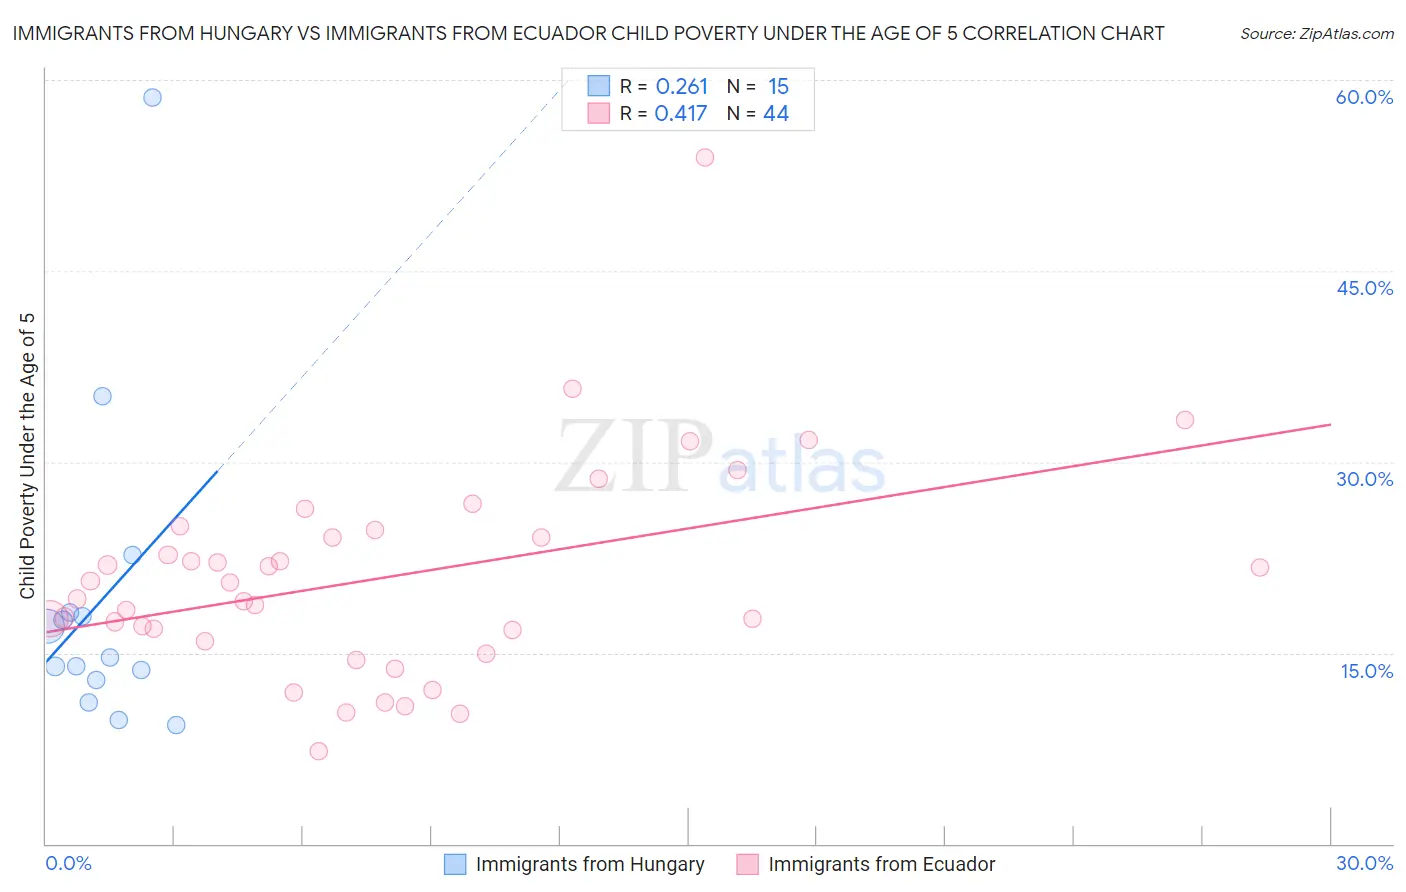 Immigrants from Hungary vs Immigrants from Ecuador Child Poverty Under the Age of 5